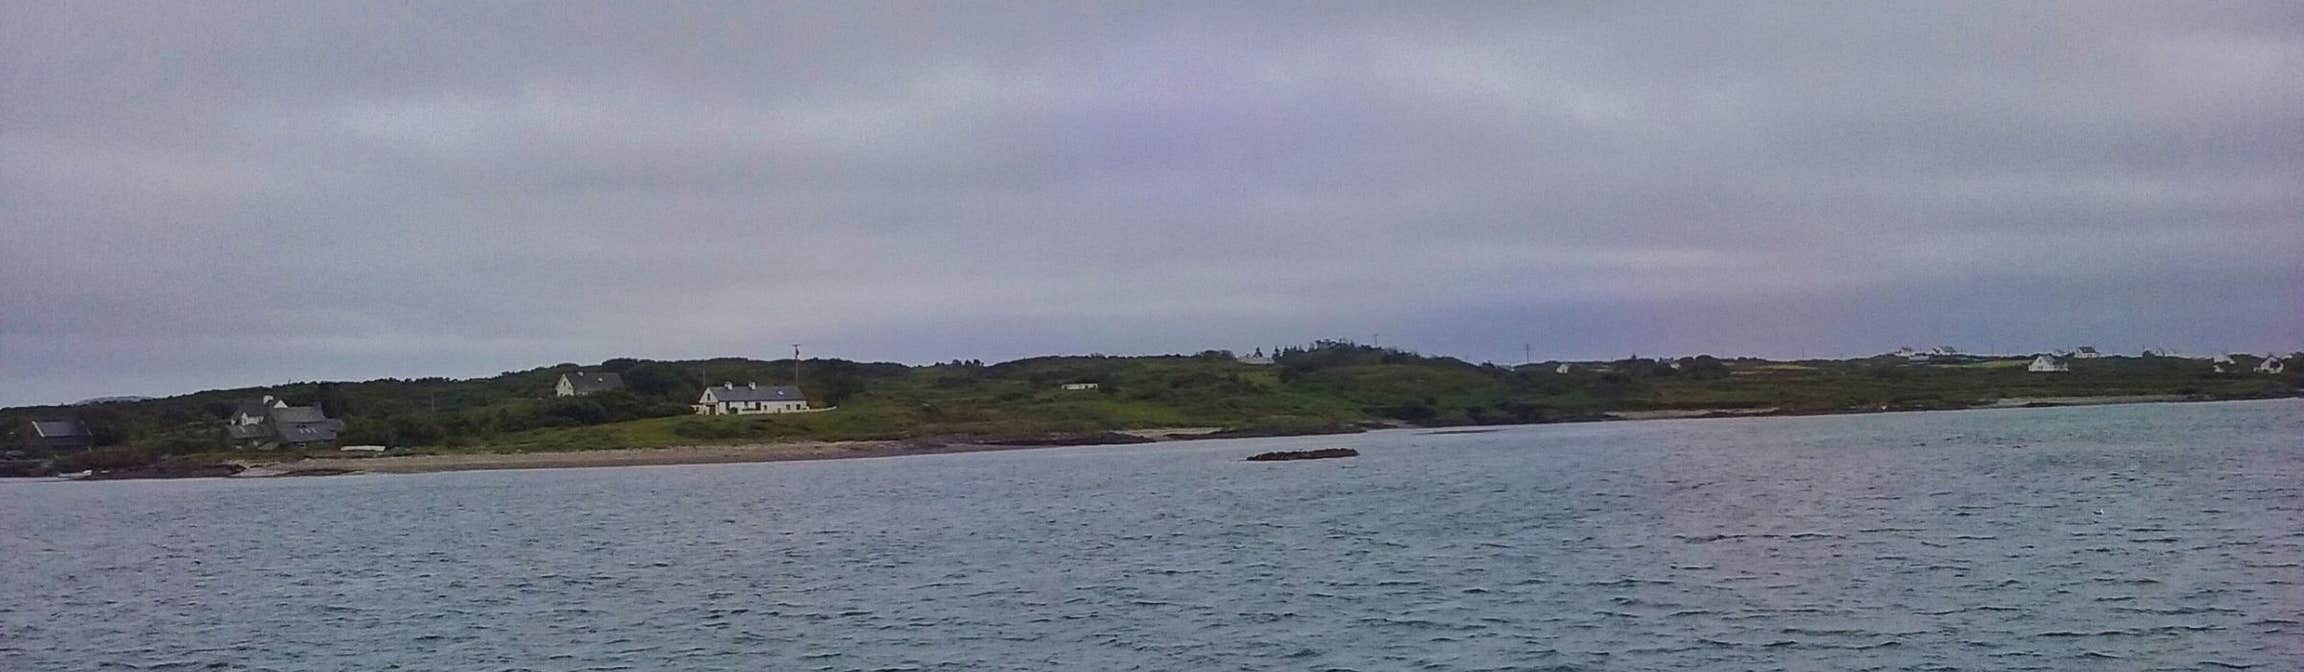 Image of Heir Island in County Cork